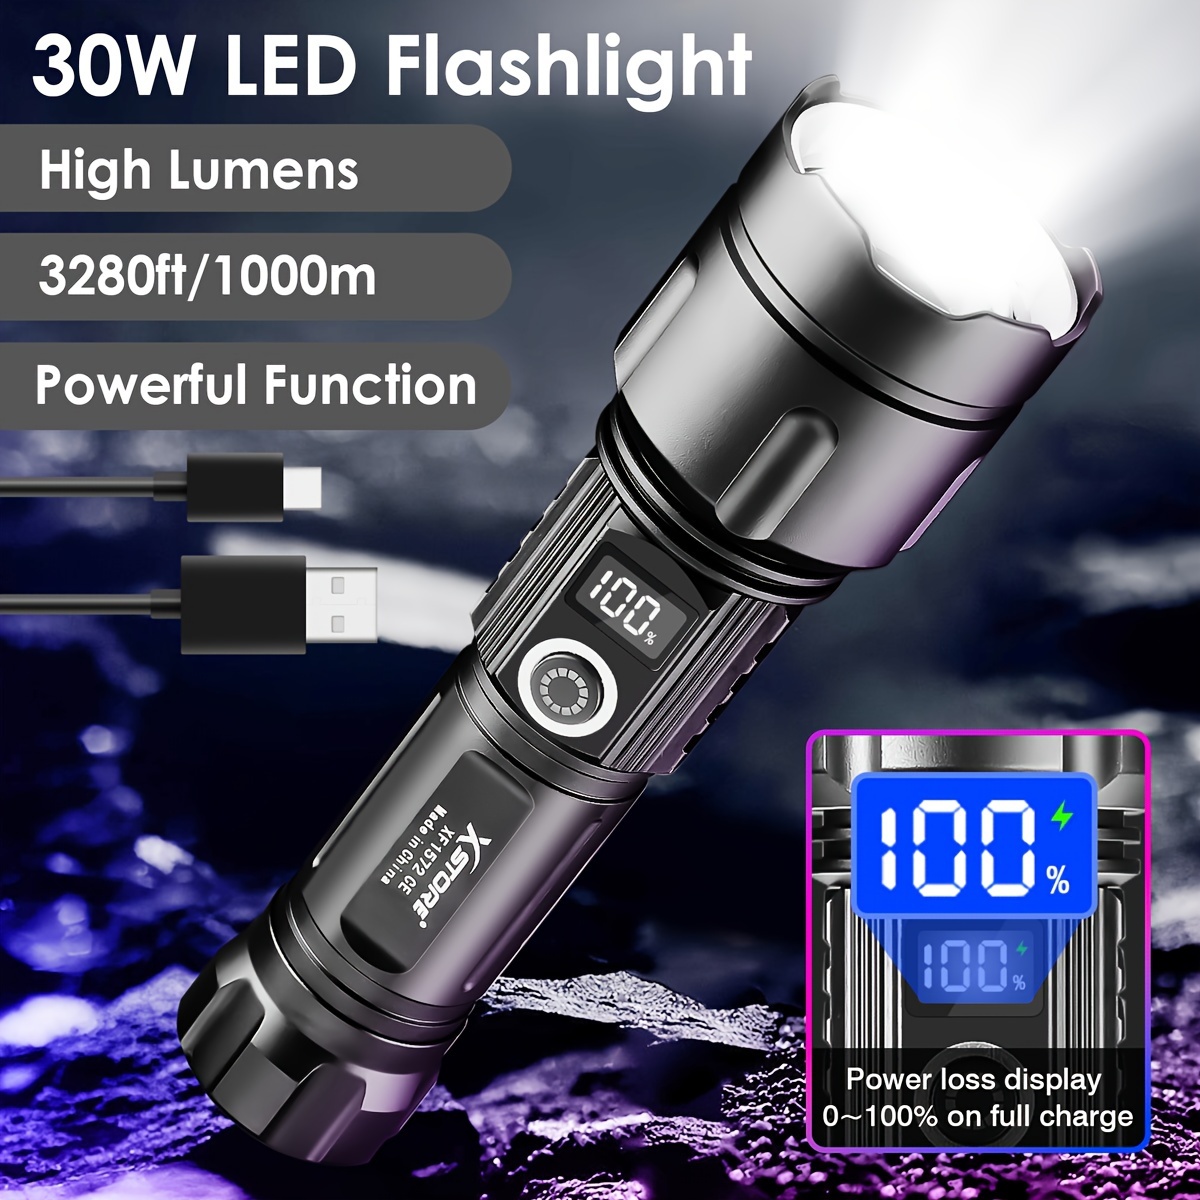 

Super Bright Usb Rechargeable Led Tactical Flashlight, 5 Modes Waterproof Zoom Torch With 26650 Battery And Power Display For Emergencies, Mountaineering, Camping, Hiking